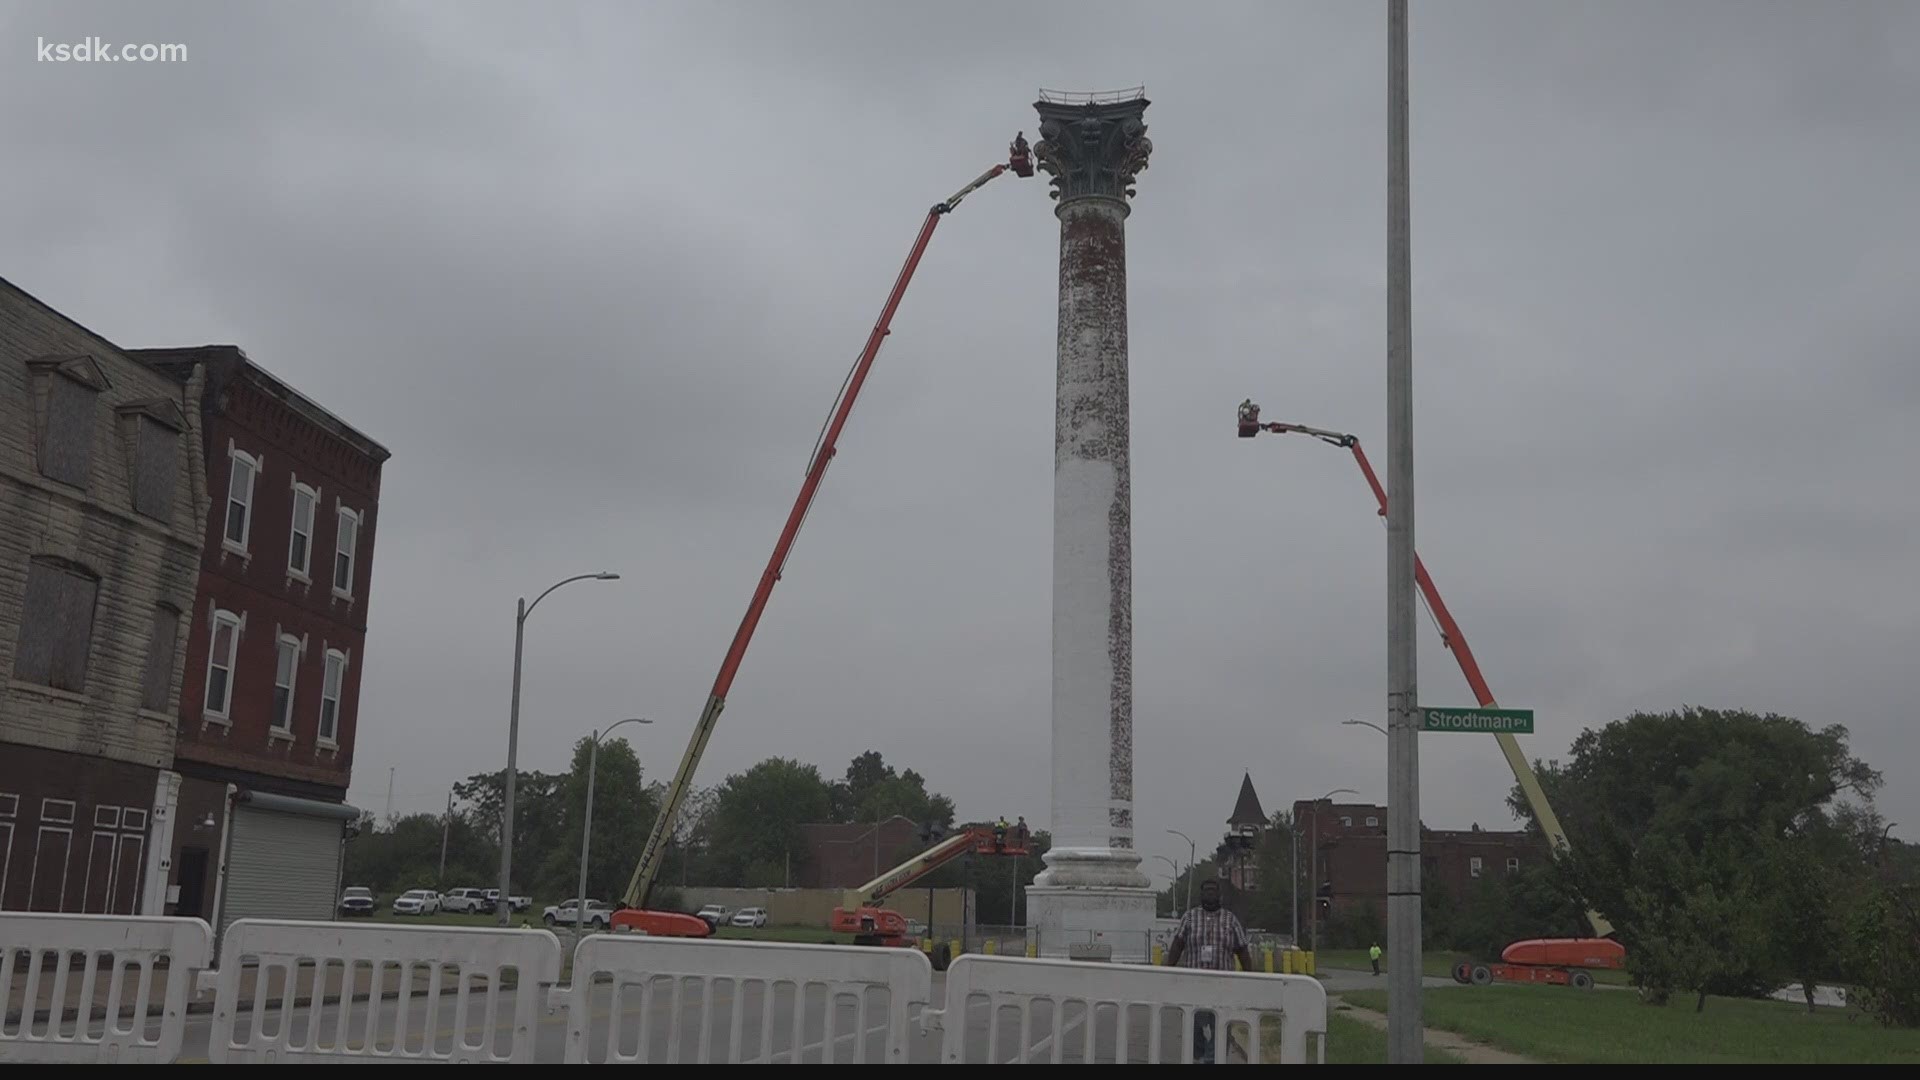 The tower has been standing in north St. Louis since 1871. Over the weekend, it got its first fresh coat of paint in 70 years